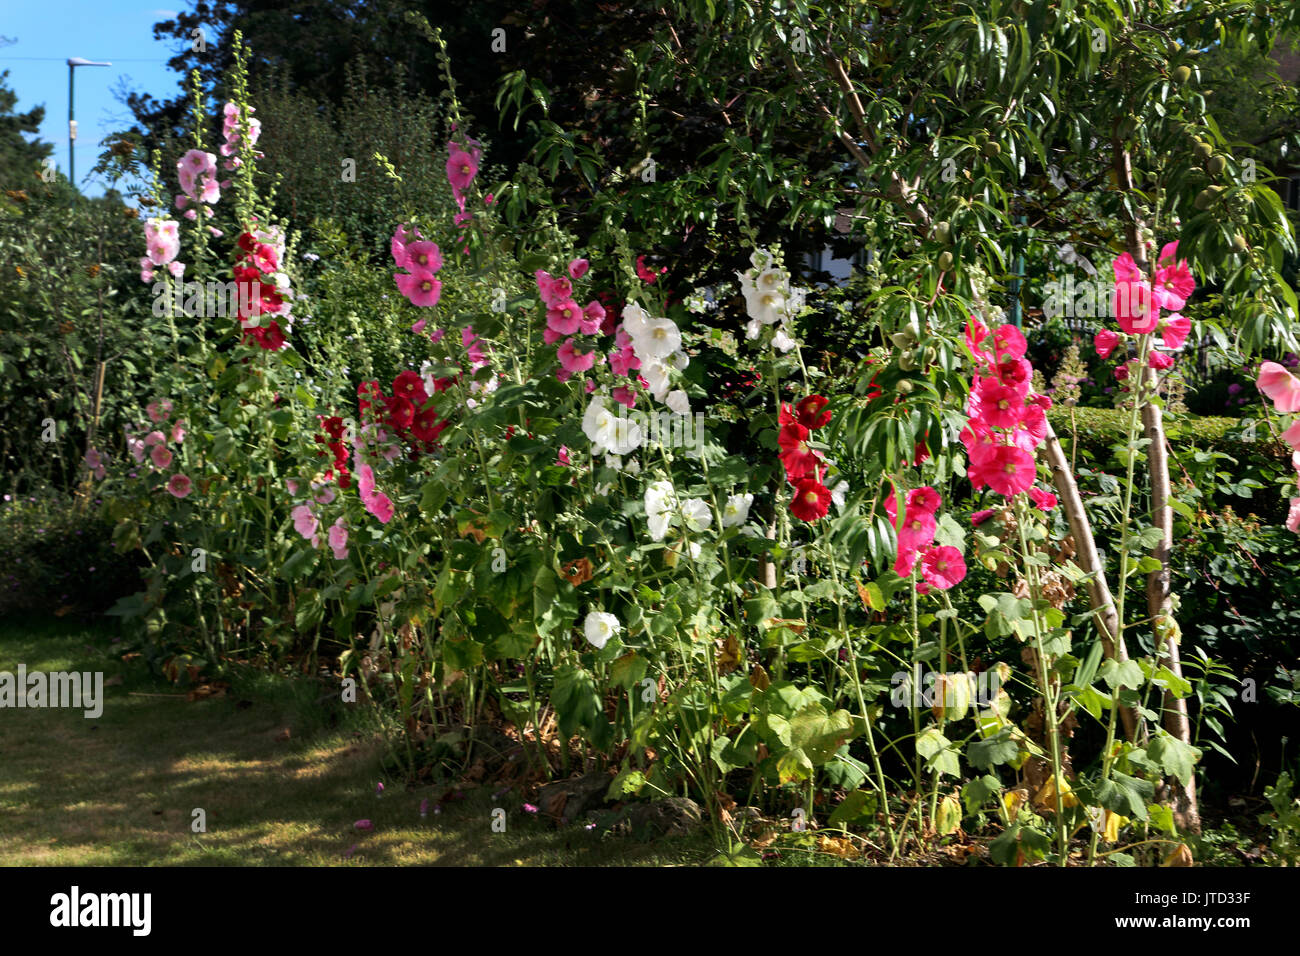 Red,Pink and White Hollyhocks in Garden Surrey England Stock Photo